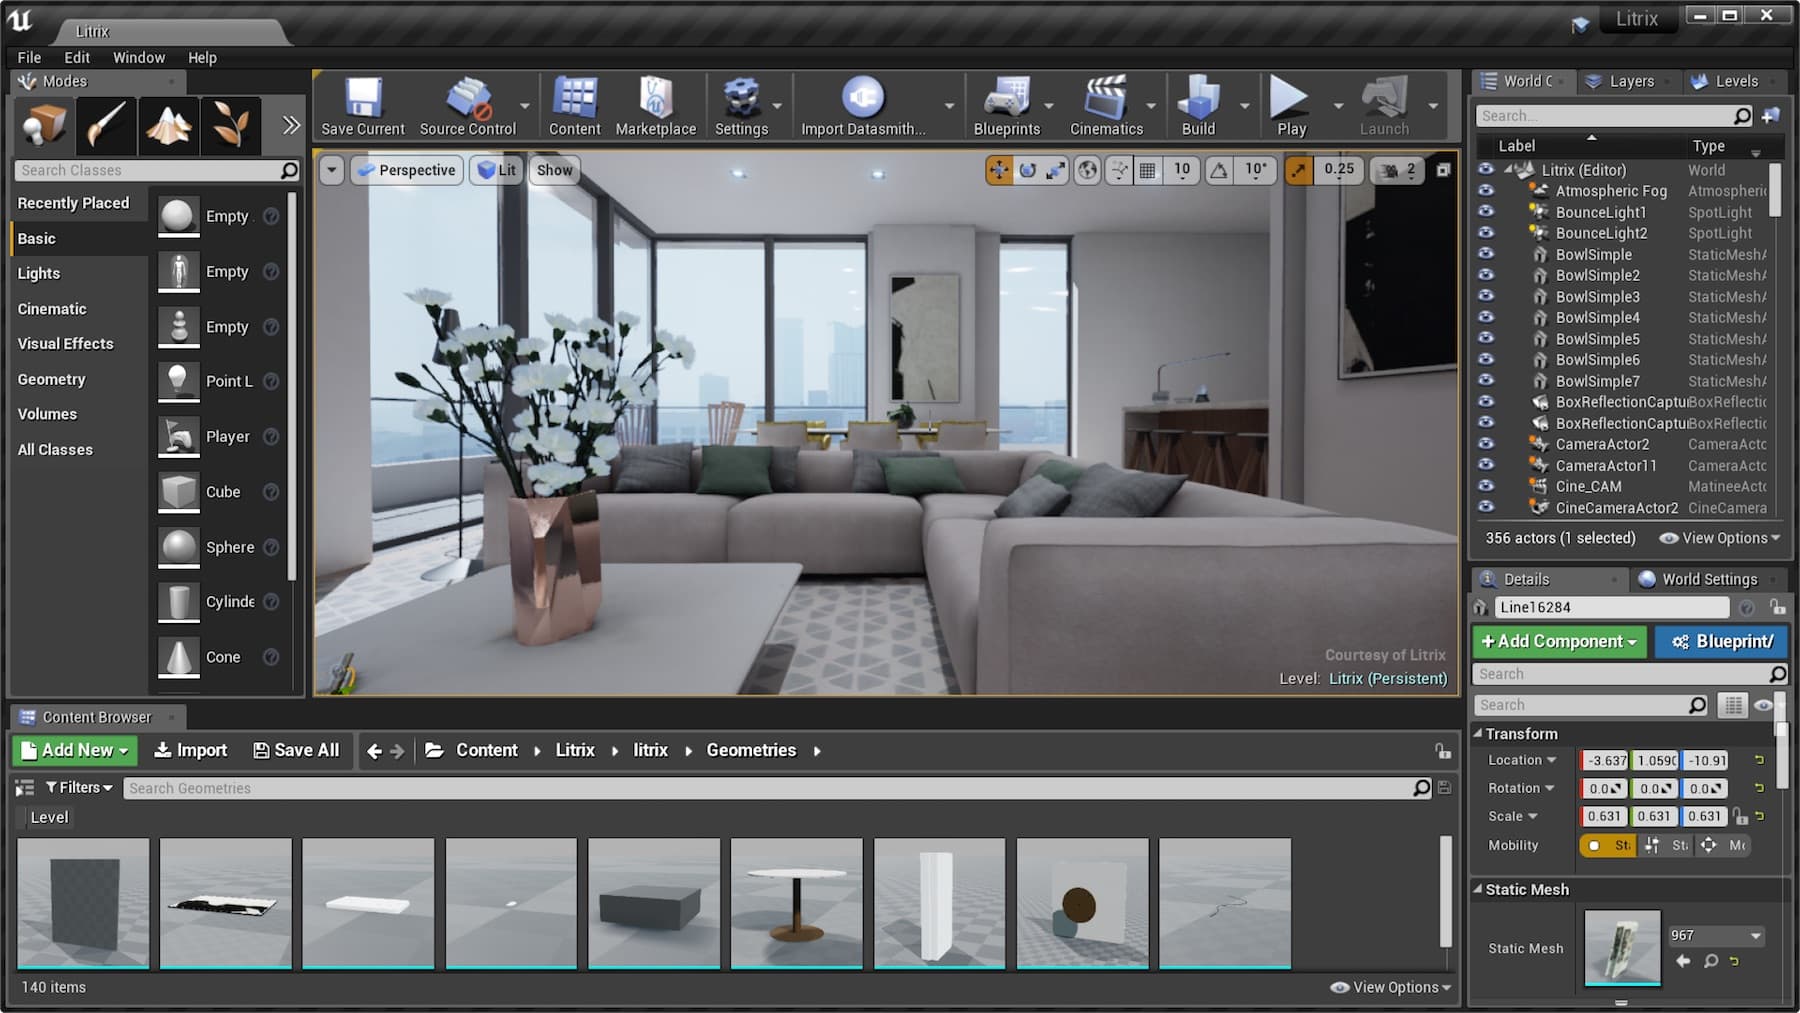 Epic Games Launches Unreal Engine Online Learning Platform